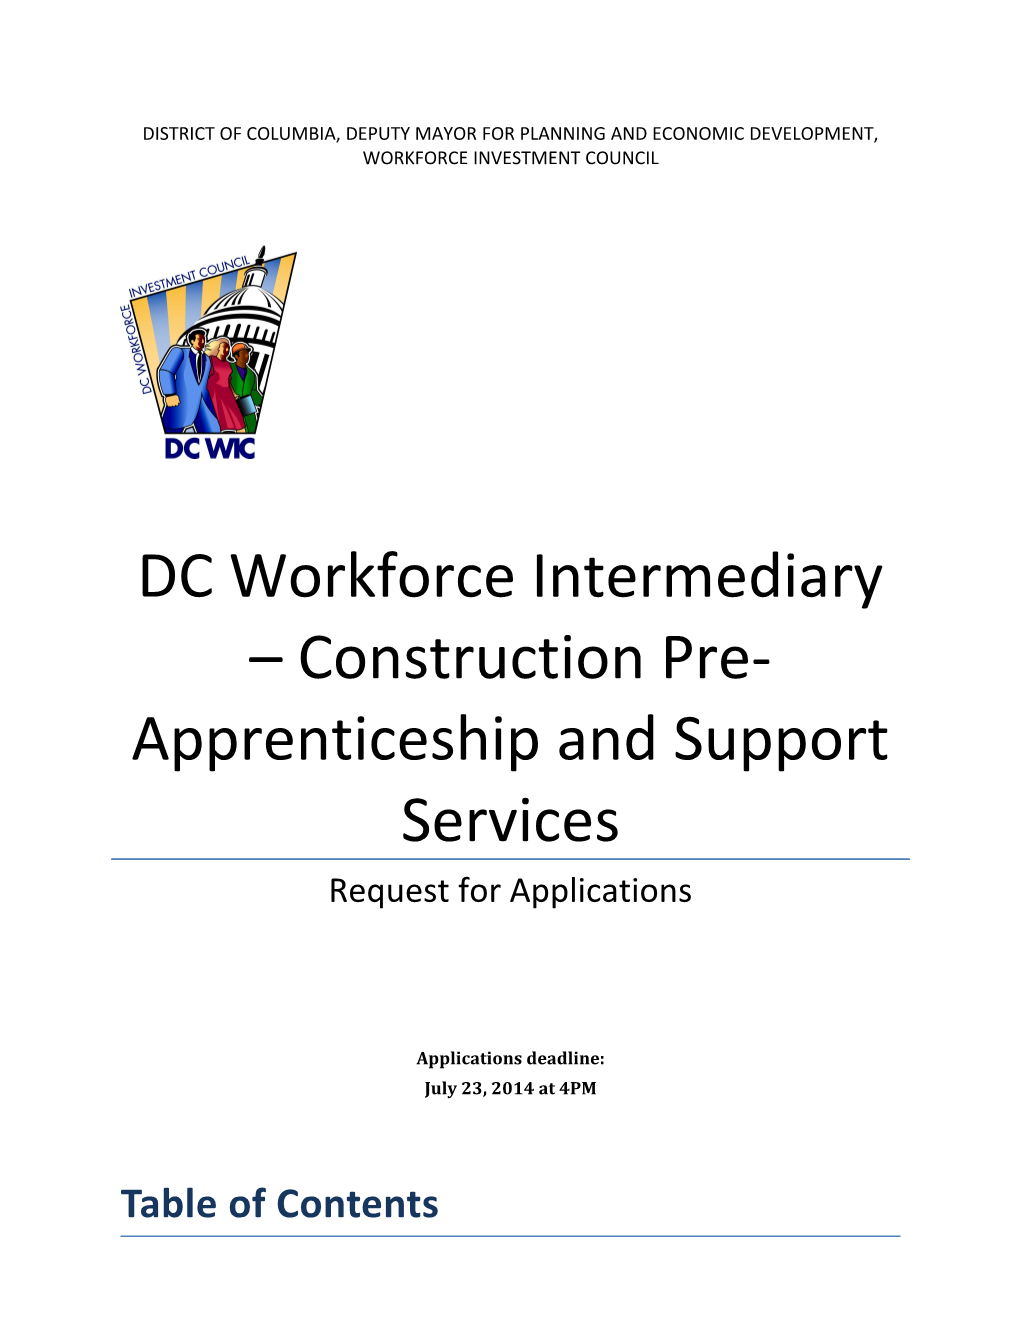 DC Workforce Intermediary Construction Pre-Apprenticeship and Support Services